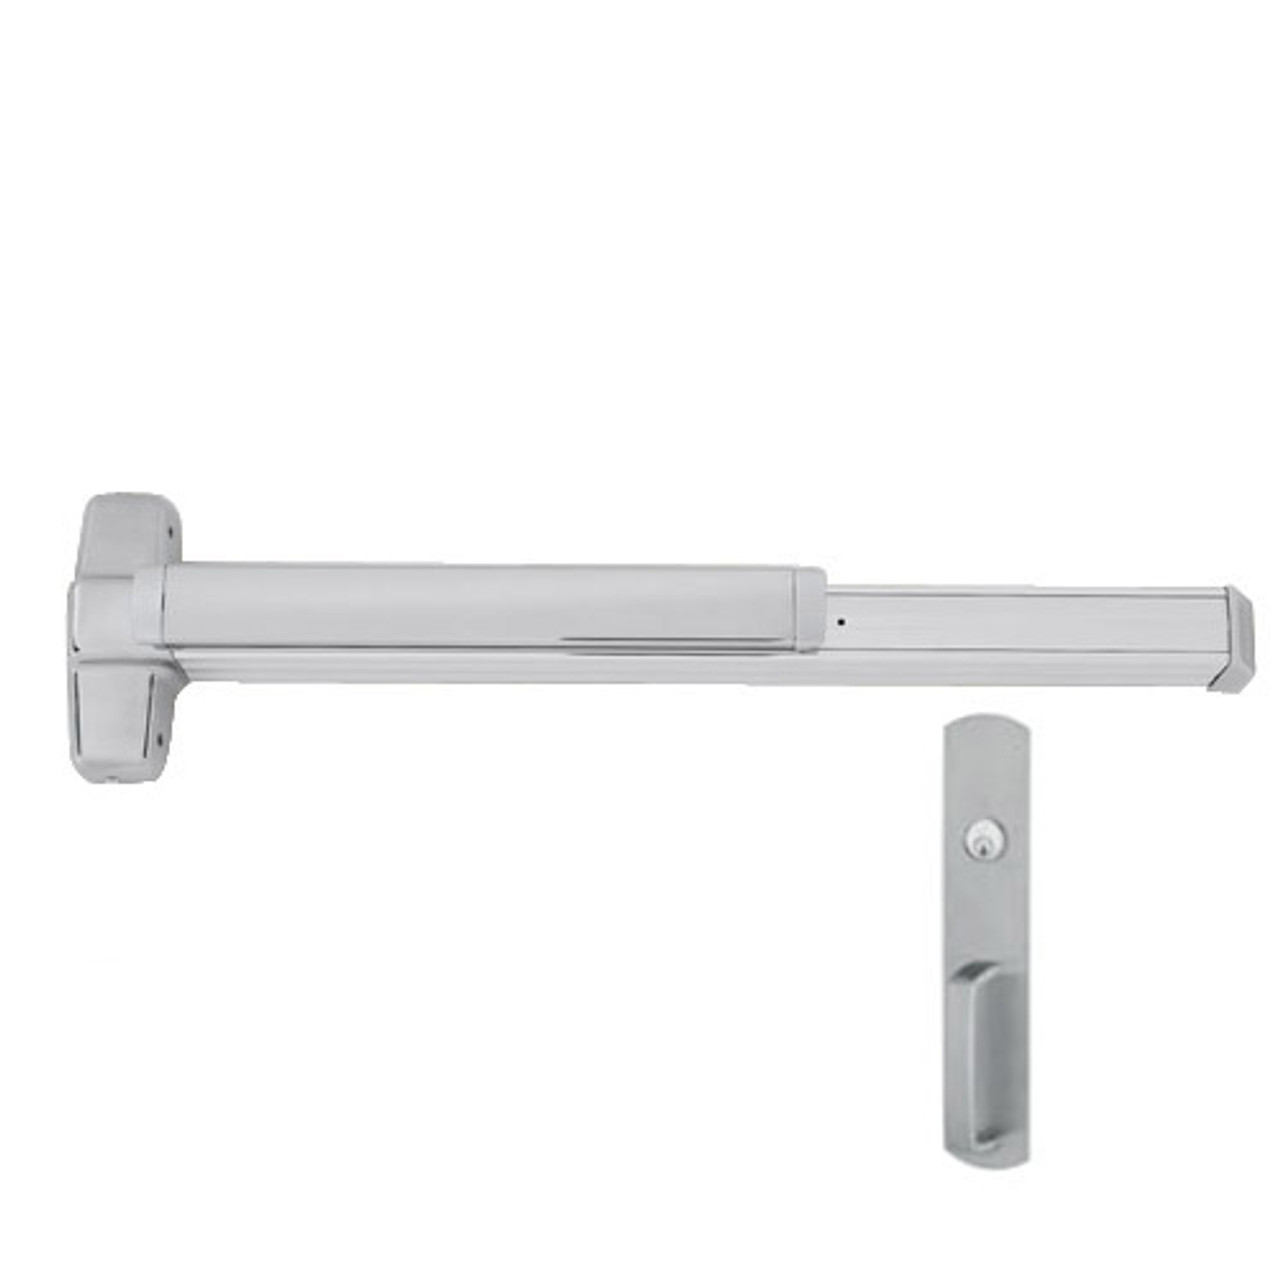 EL9847WDC-NL-US32D-4 Von Duprin Exit Device with Electric Latch Retraction in Satin Stainless